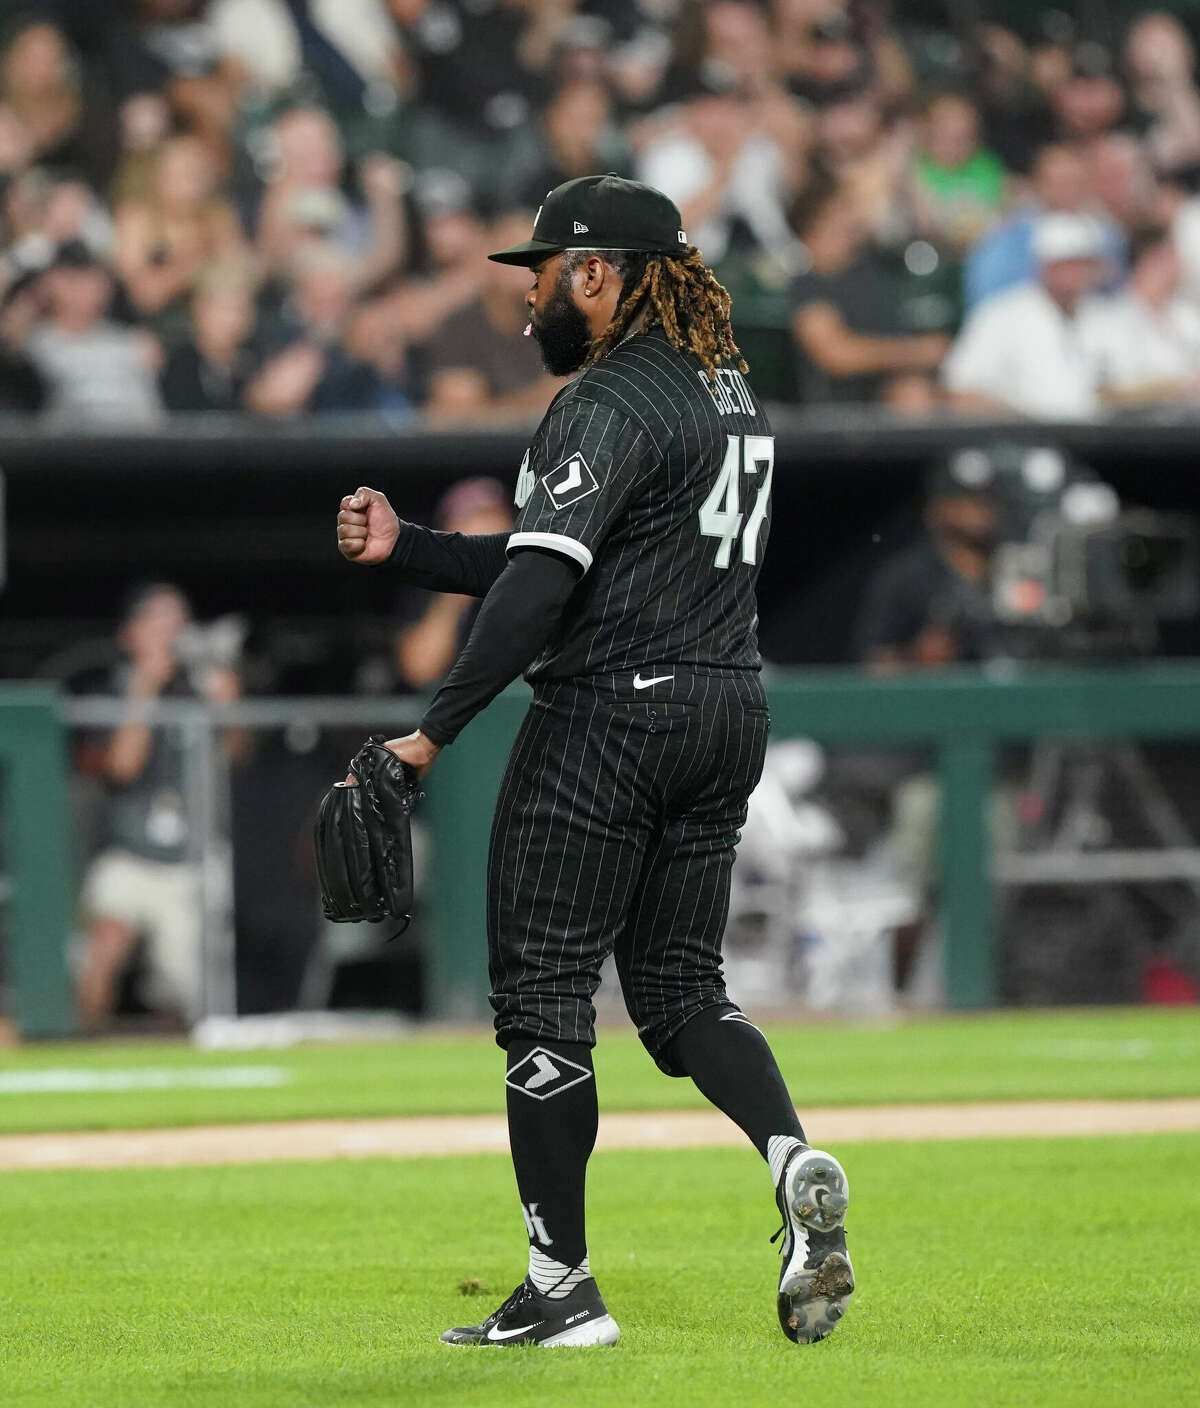 CHICAGO, ILLINOIS - AUGUST 15: Johnny Cueto #47 of the Chicago White Sox reacts after finishing the sixth inning against the Houston Astros at Guaranteed Rate Field on August 15, 2022 in Chicago, Illinois. (Photo by Nuccio DiNuzzo/Getty Images)